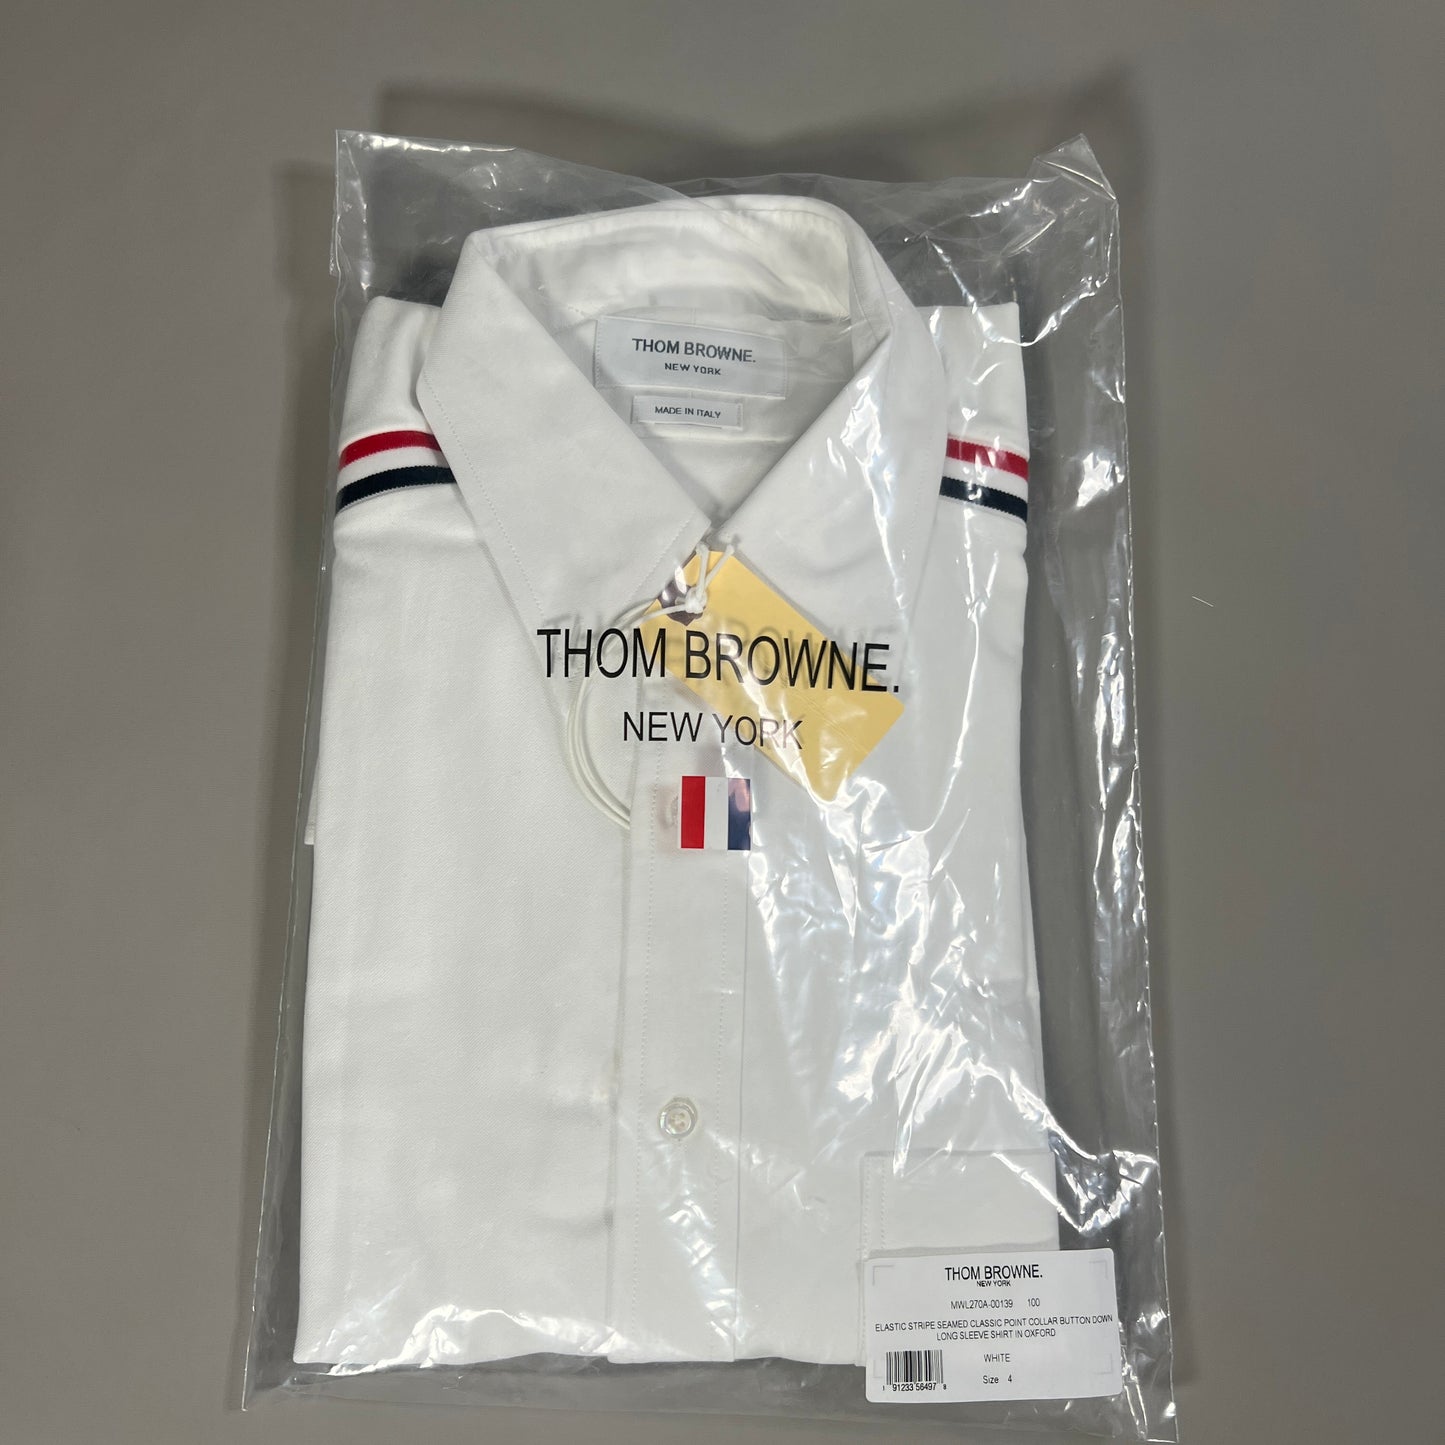 THOM BROWNE Elastic Stripe Seamed Classic Point Collar Button Down LS Shirt Oxford White Size 4 (NEW)